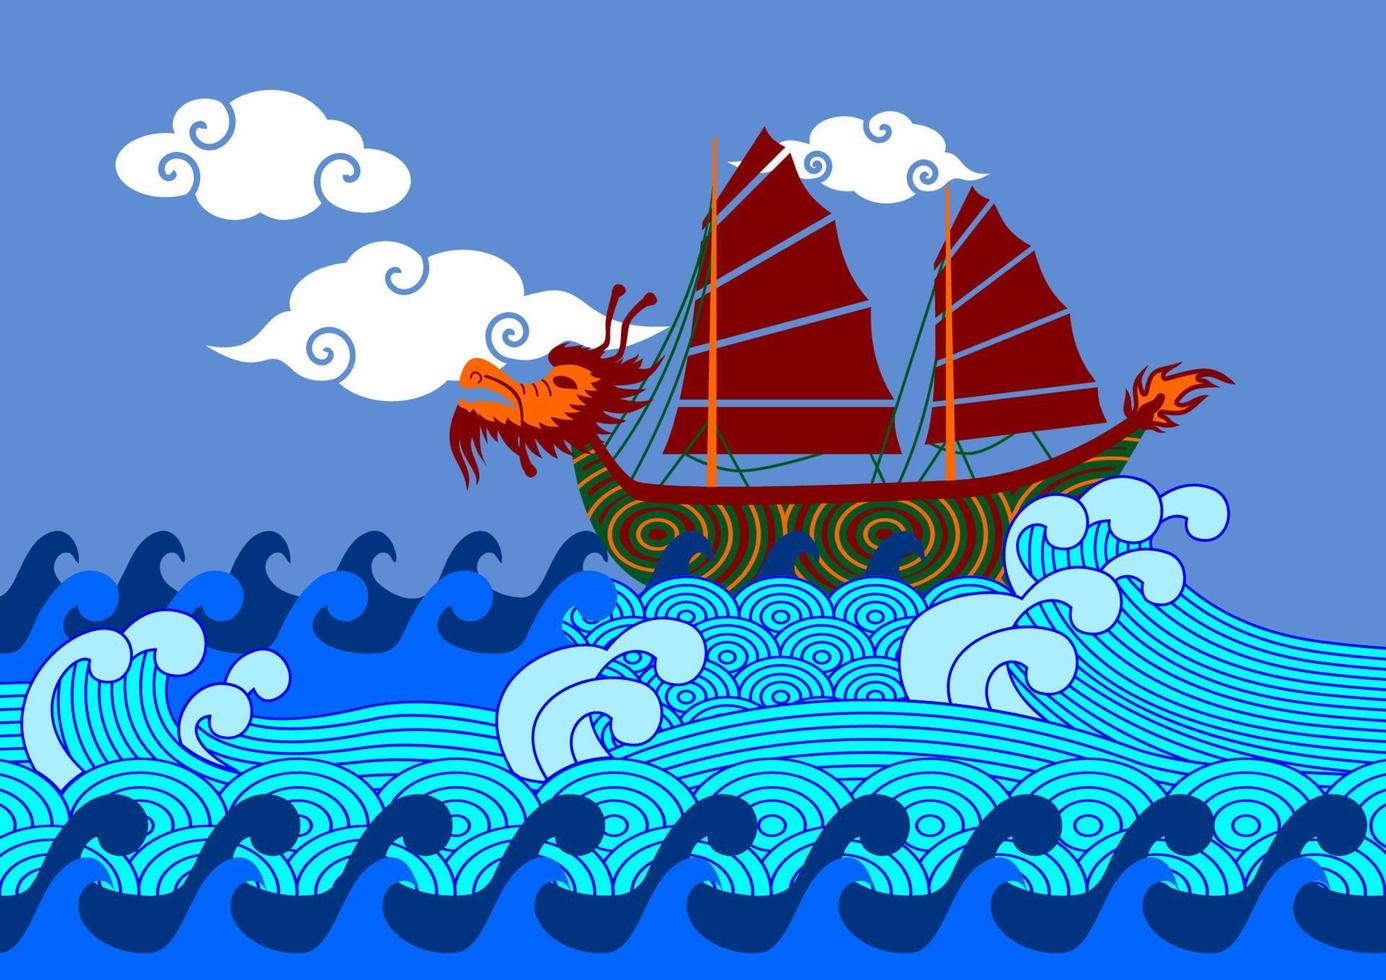 Editable Vector Illustration of Typical Chinese Dragon Boat on Wavy Sea for Tourism and Historical or Cultural Education